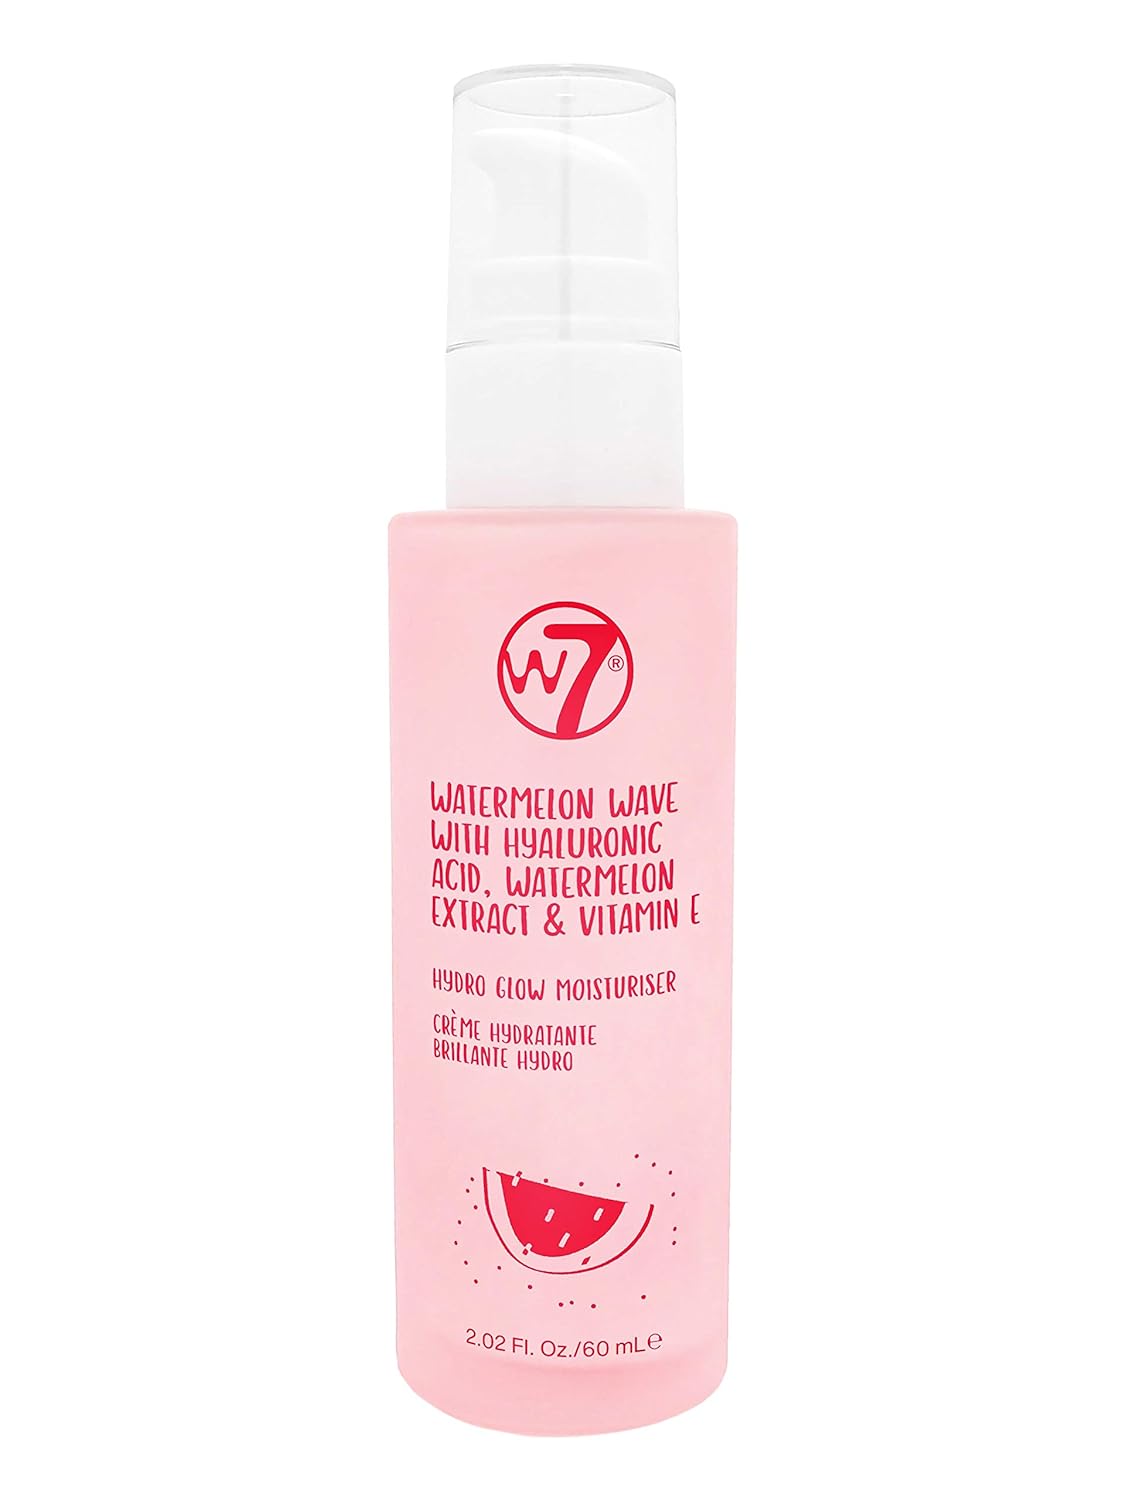 W7 Watermelon Wave Hydro-Glow Moisturizer - Face Cream Infused with Watermelon Juice Extract that Naturally Hydrates Skin 2.02fl oz